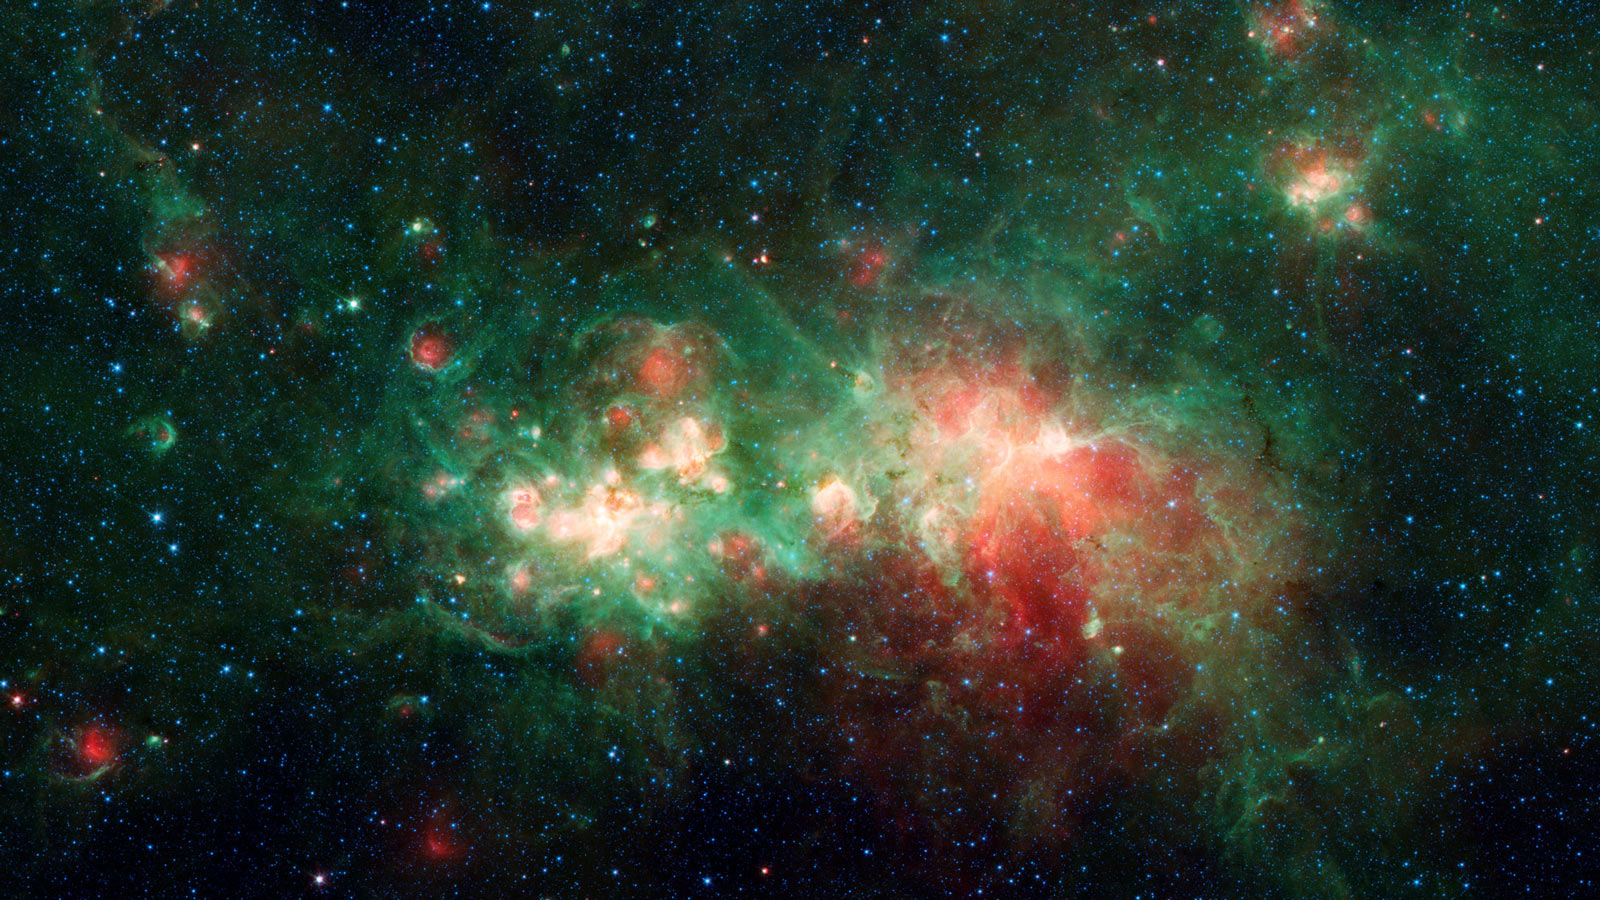 Swirls of green and red dotted by blue stars make up this infrared view of nebula W51